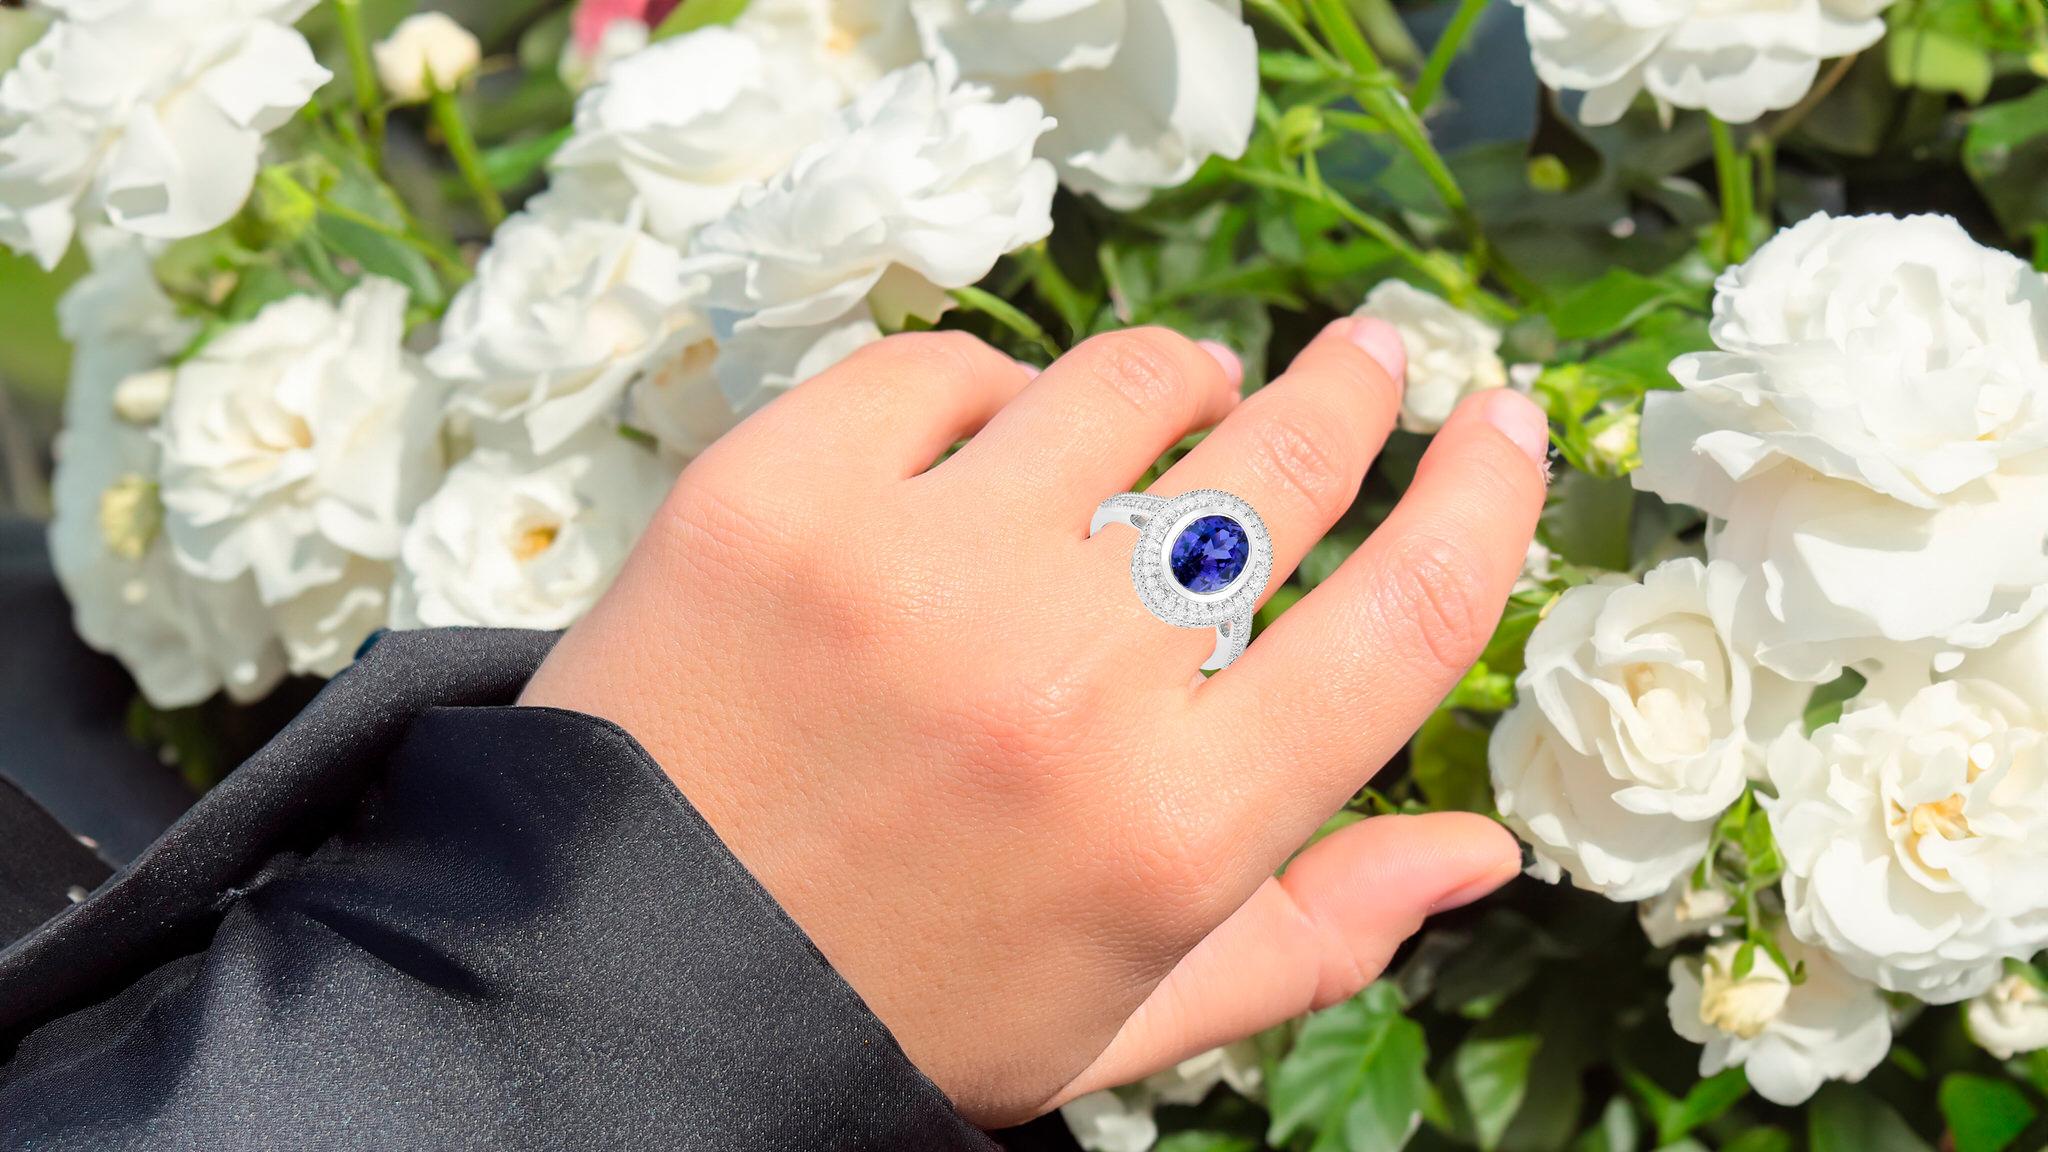 Oval Cut Tanzanite Ring With Diamonds 2.94 Carats 14K White Gold For Sale